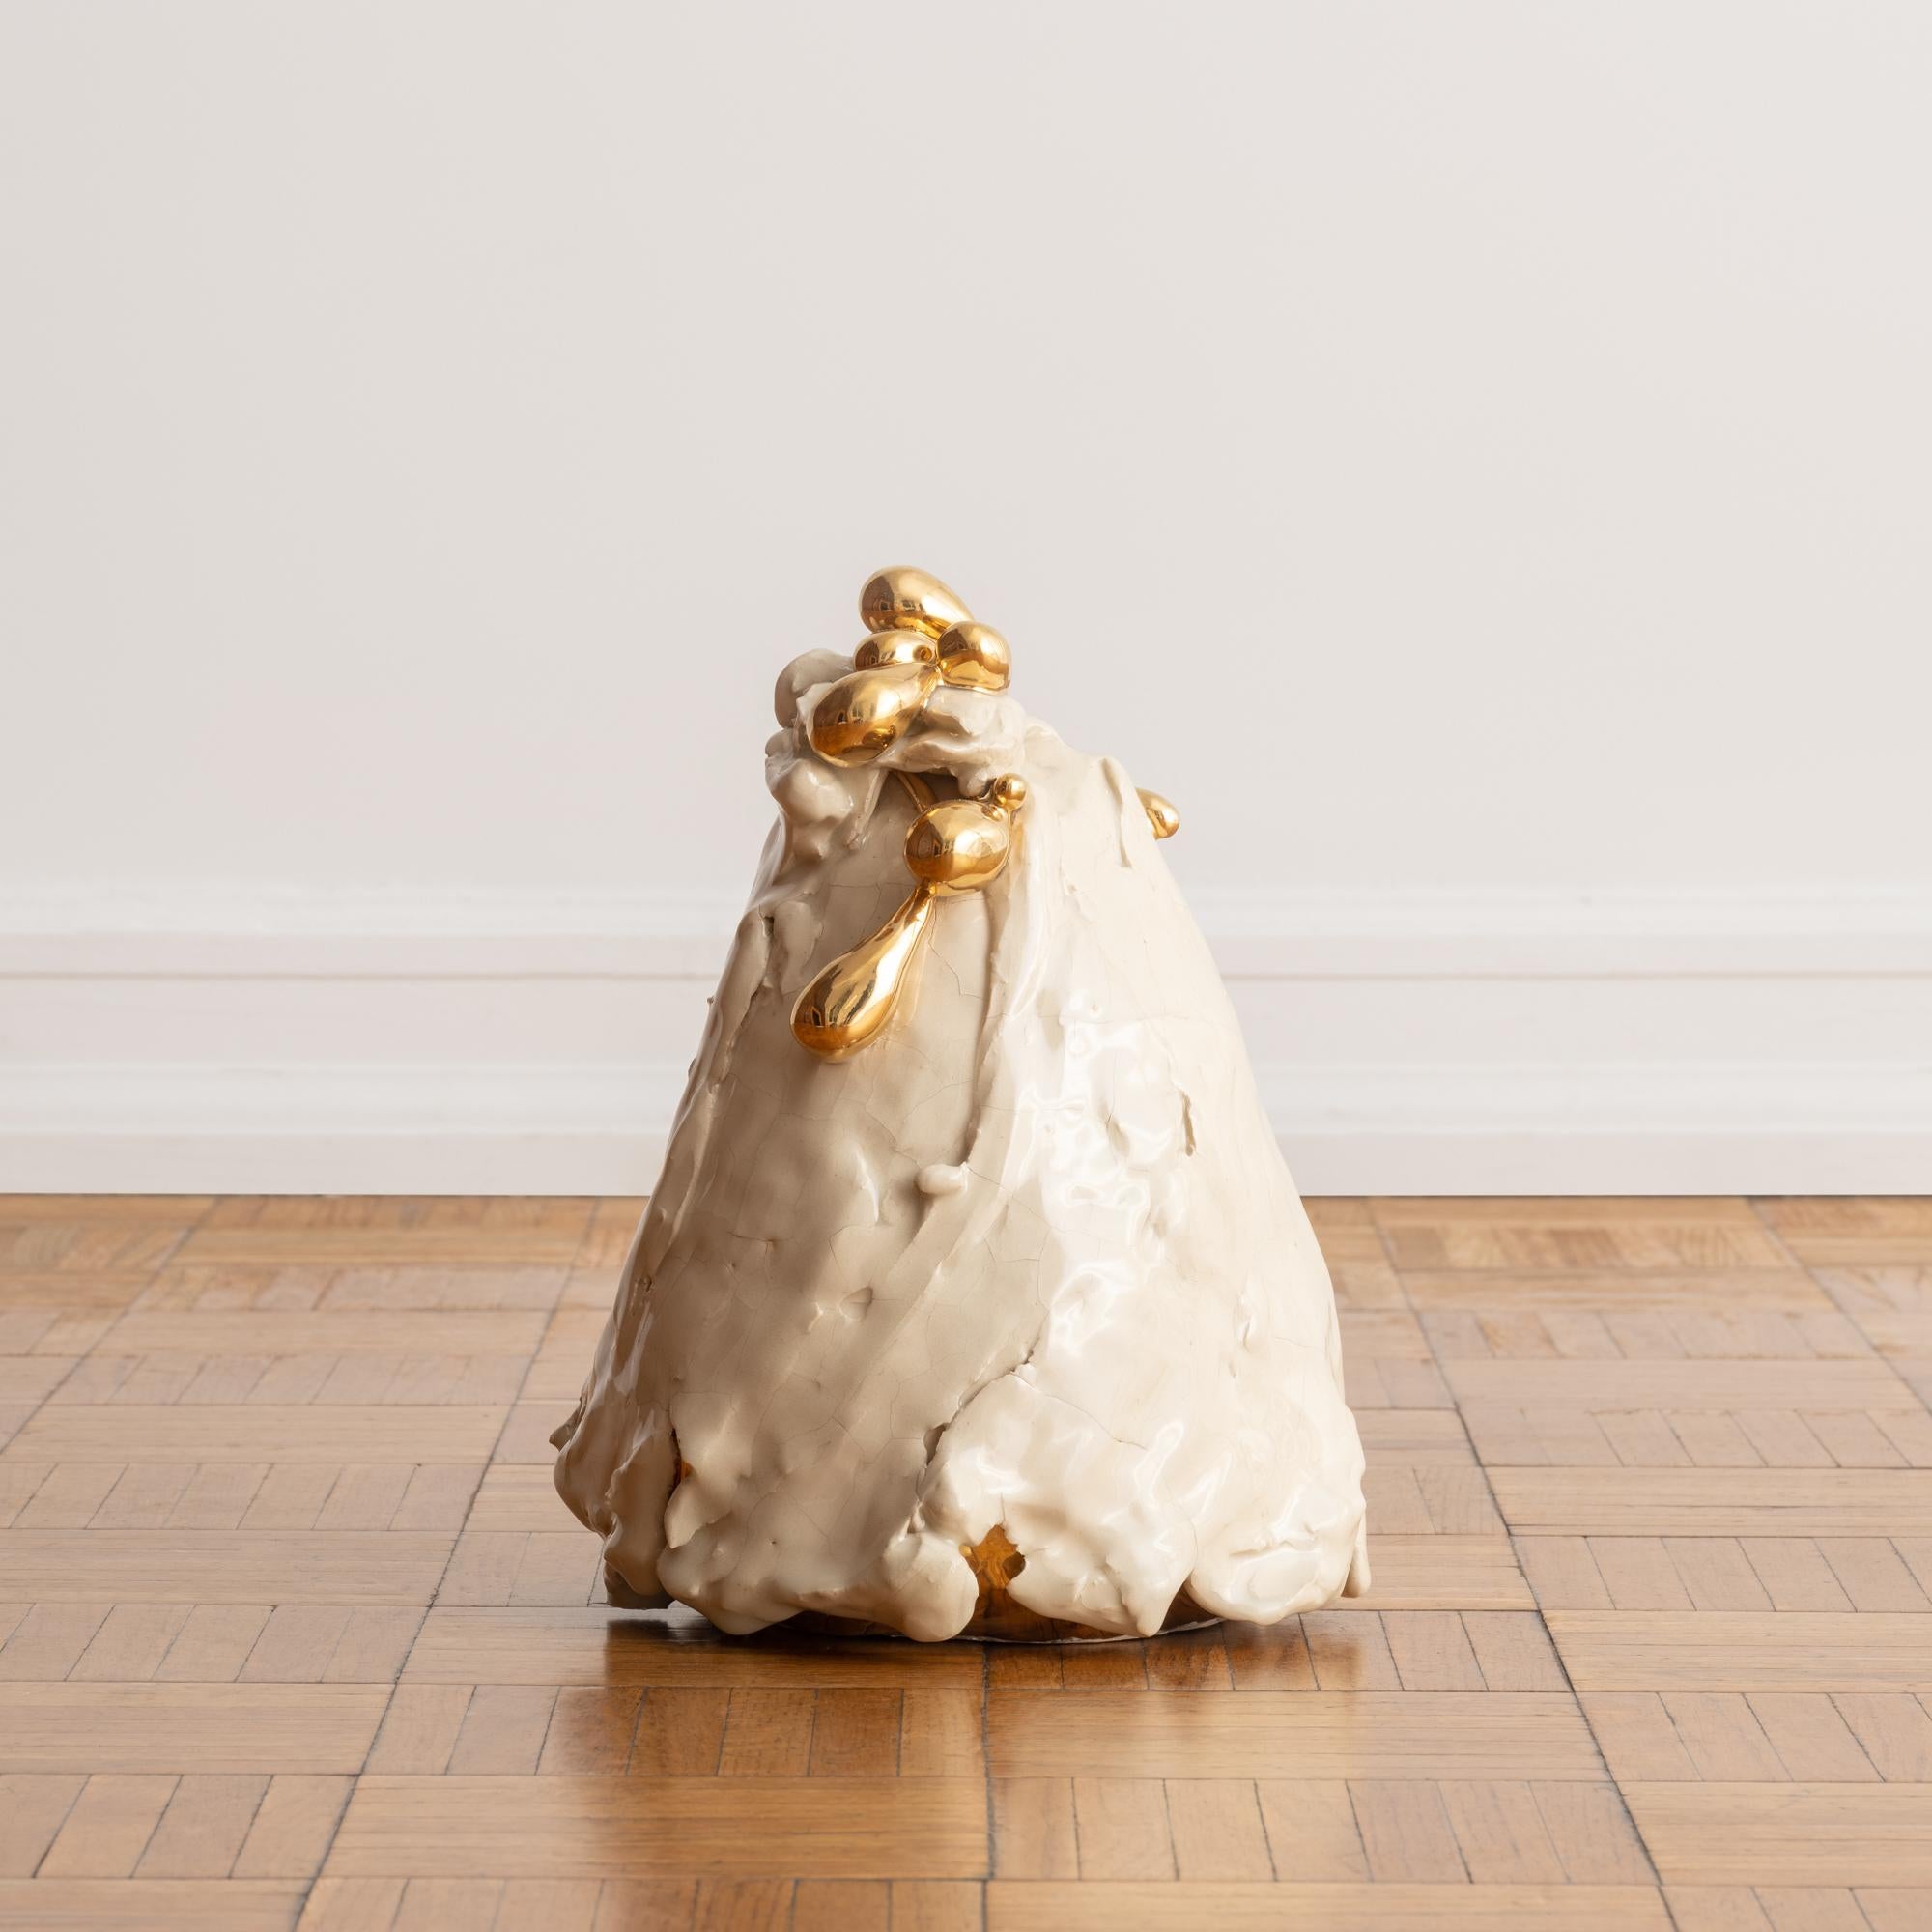 'Untitled' by Ivana Brenner, is a one-of-a-kind, contemporary hand-molded ceramic sculpture. Its surface is encased in gestural layers of glossy cream-colored glaze, with 22k gold luster meticulously applied in mesmerizing globs that shimmer and